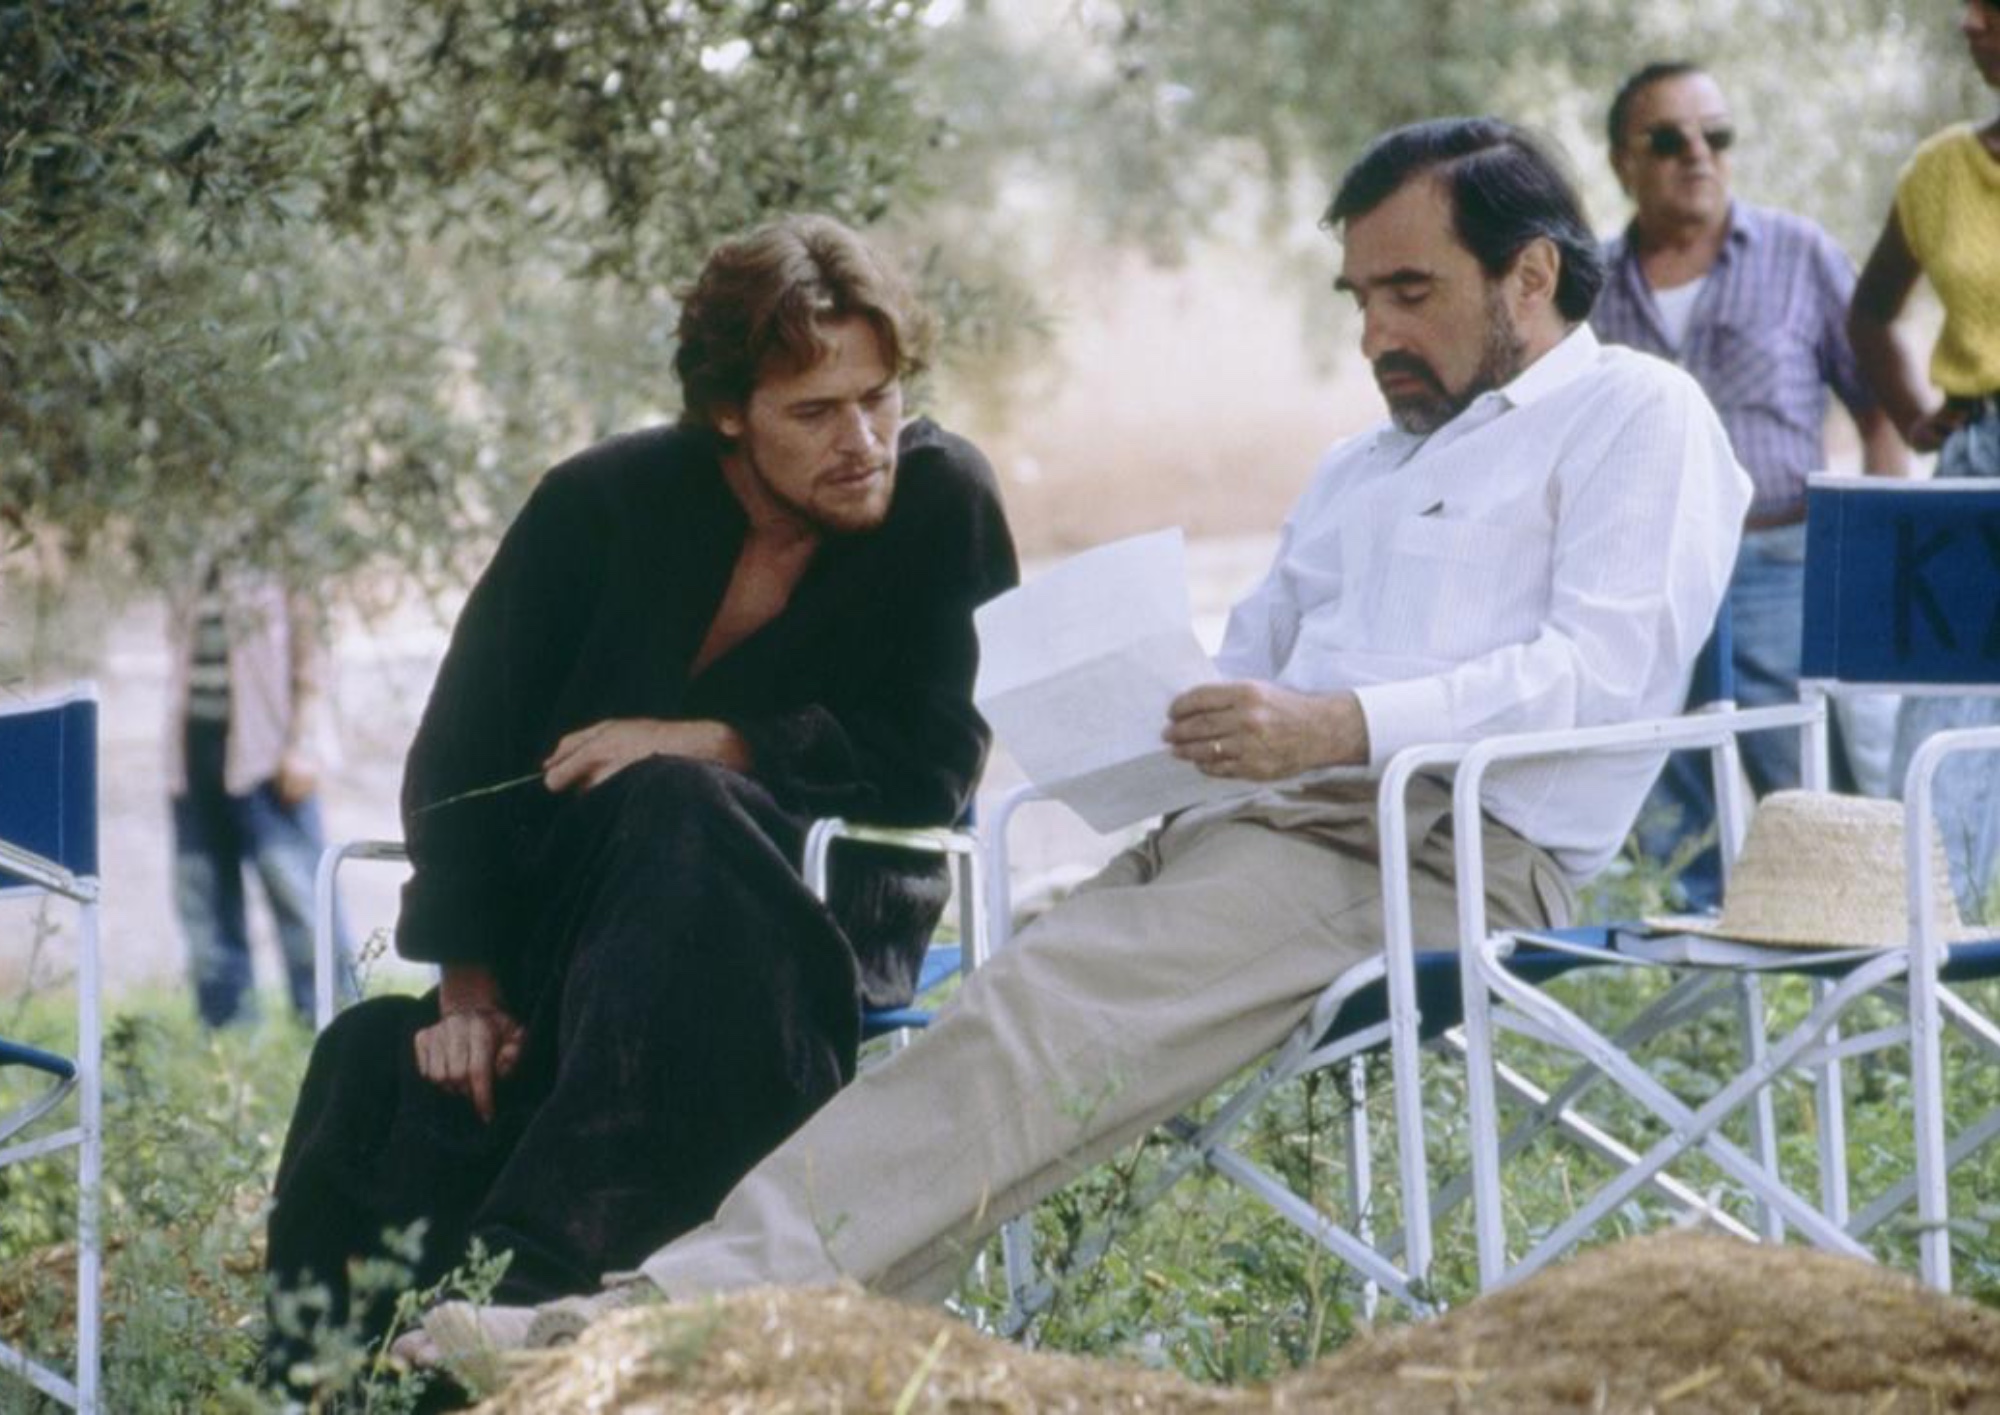 Behind The Scenes of The Last Temptation of Christ